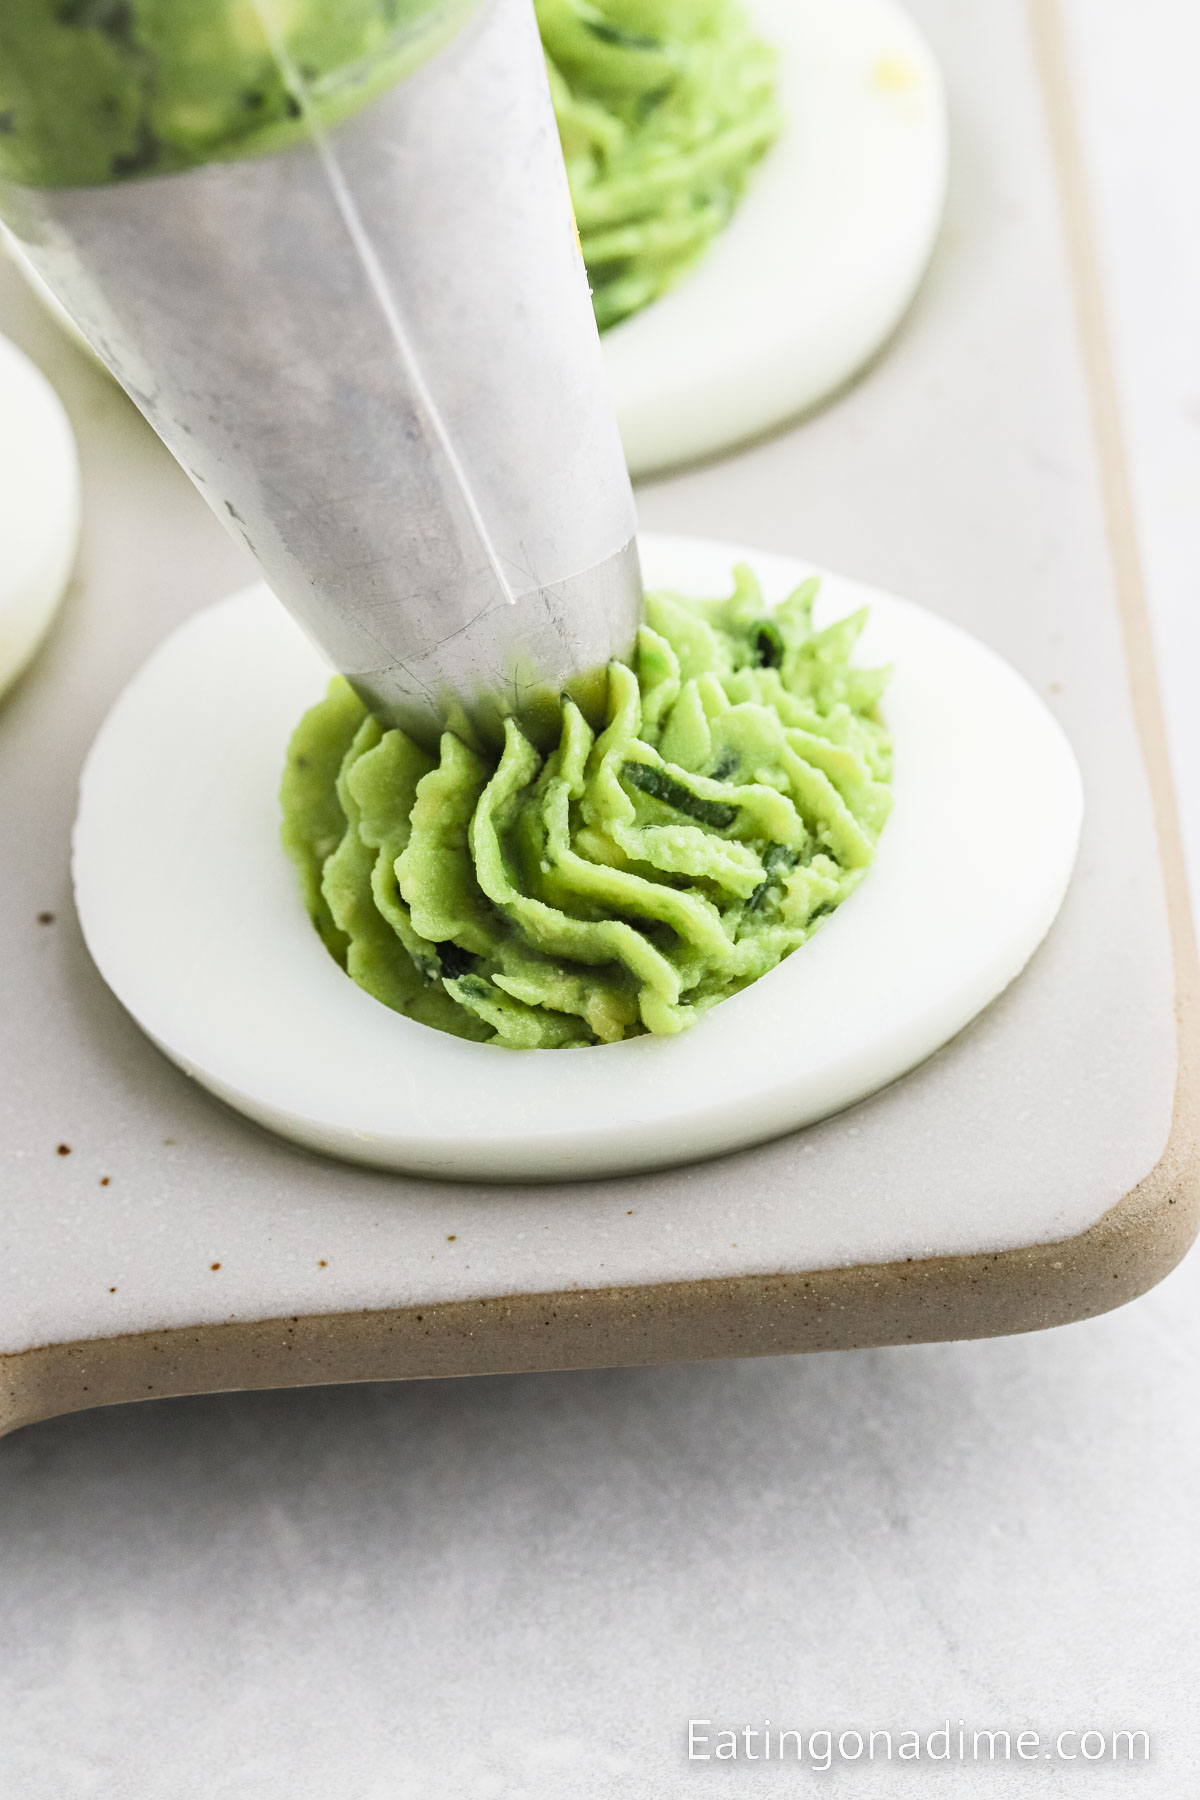 Adding the avocado filling to the egg white with a piping bag